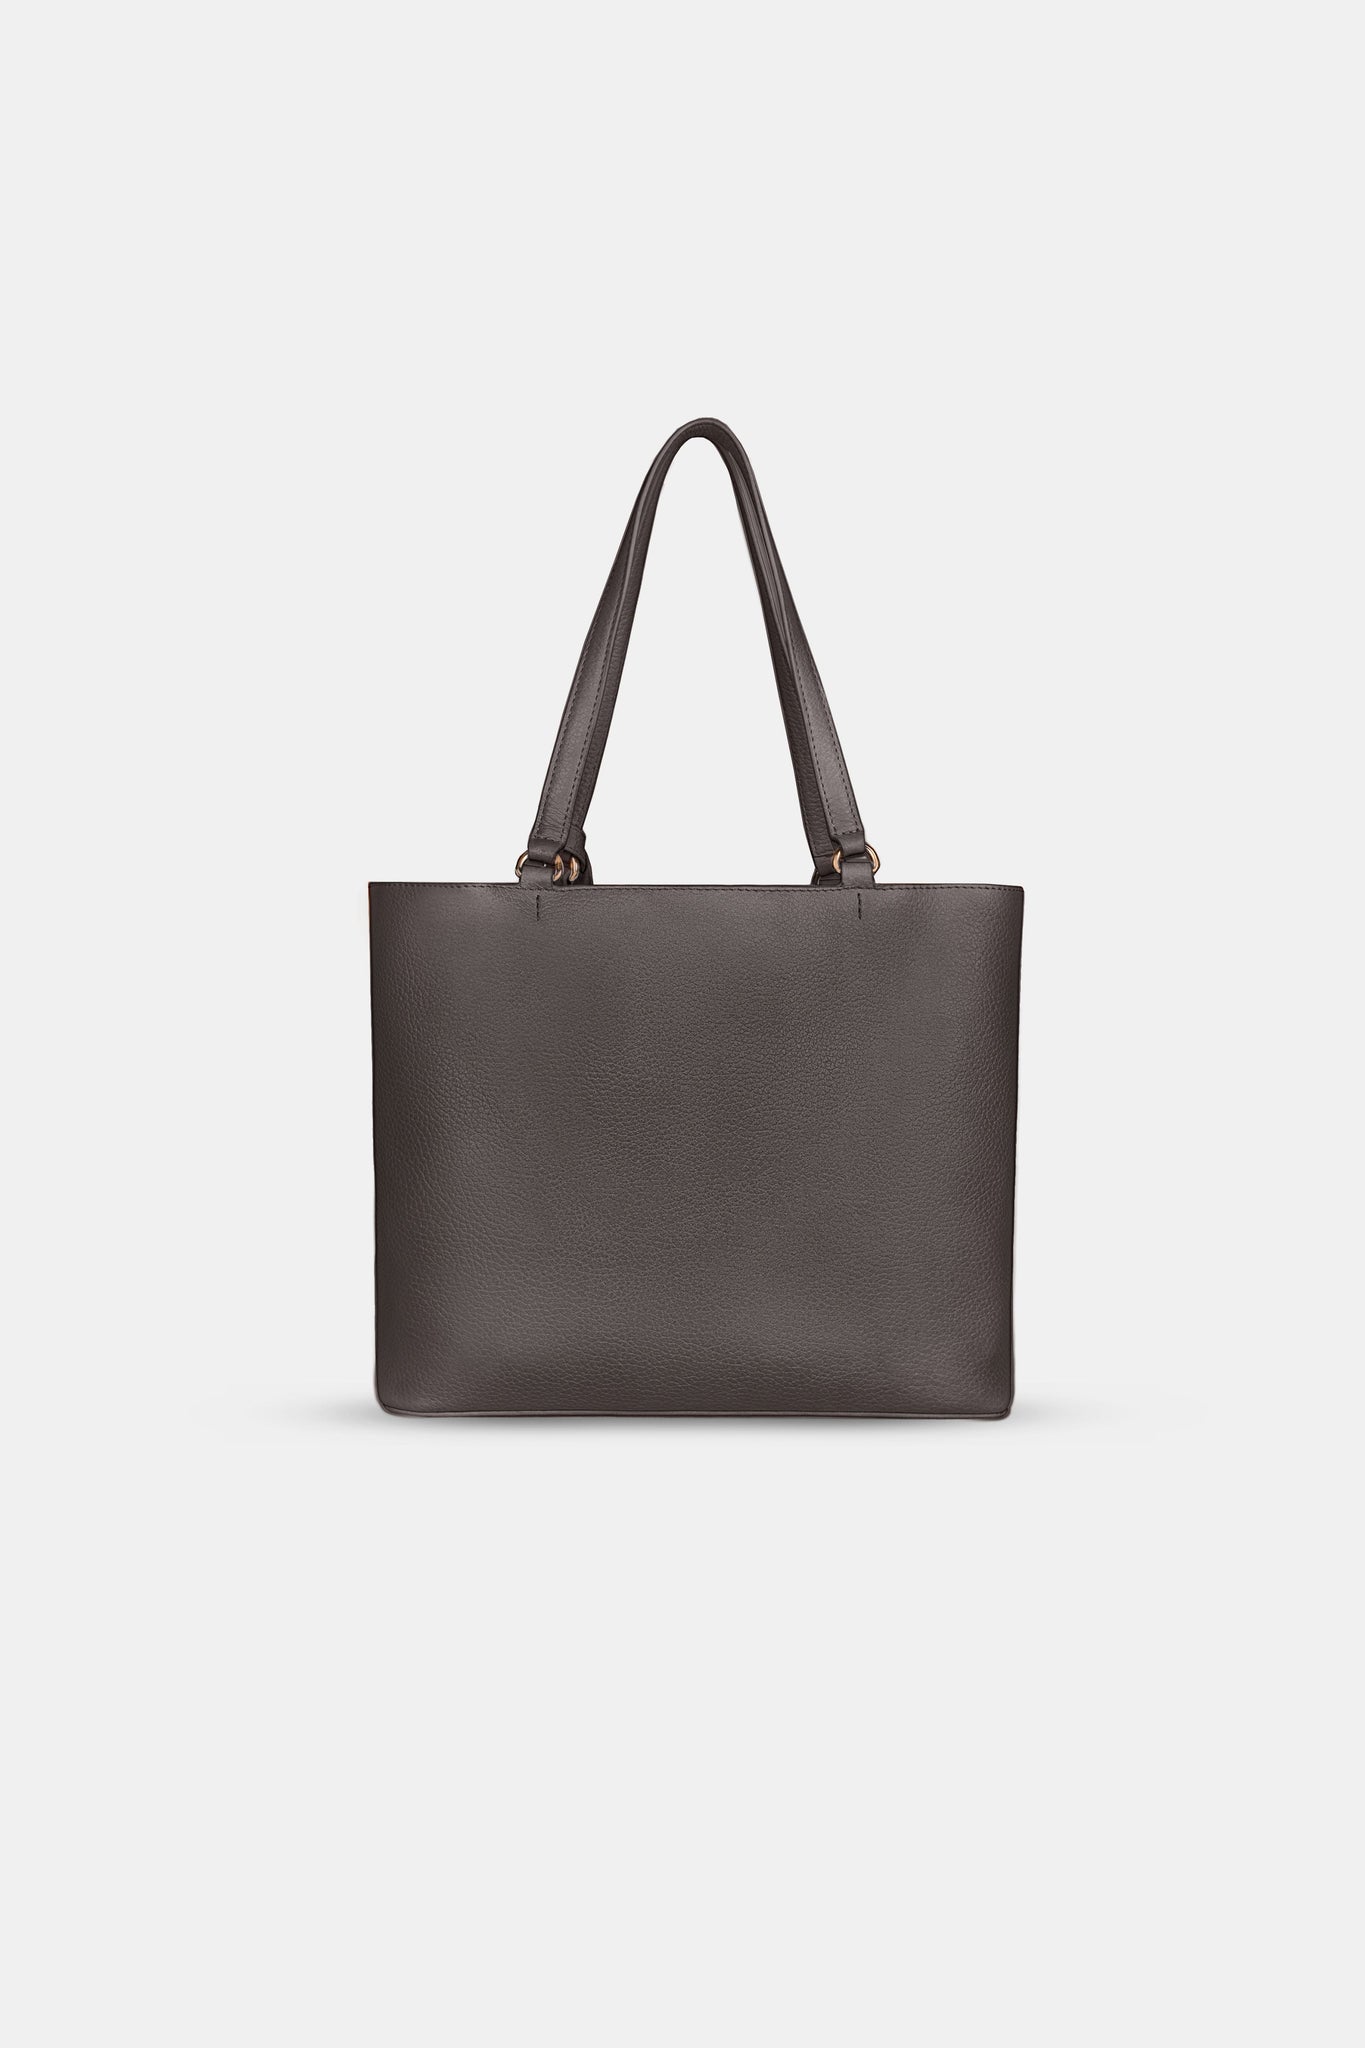 Large Tote Leather Bag - Brown Cappuccino